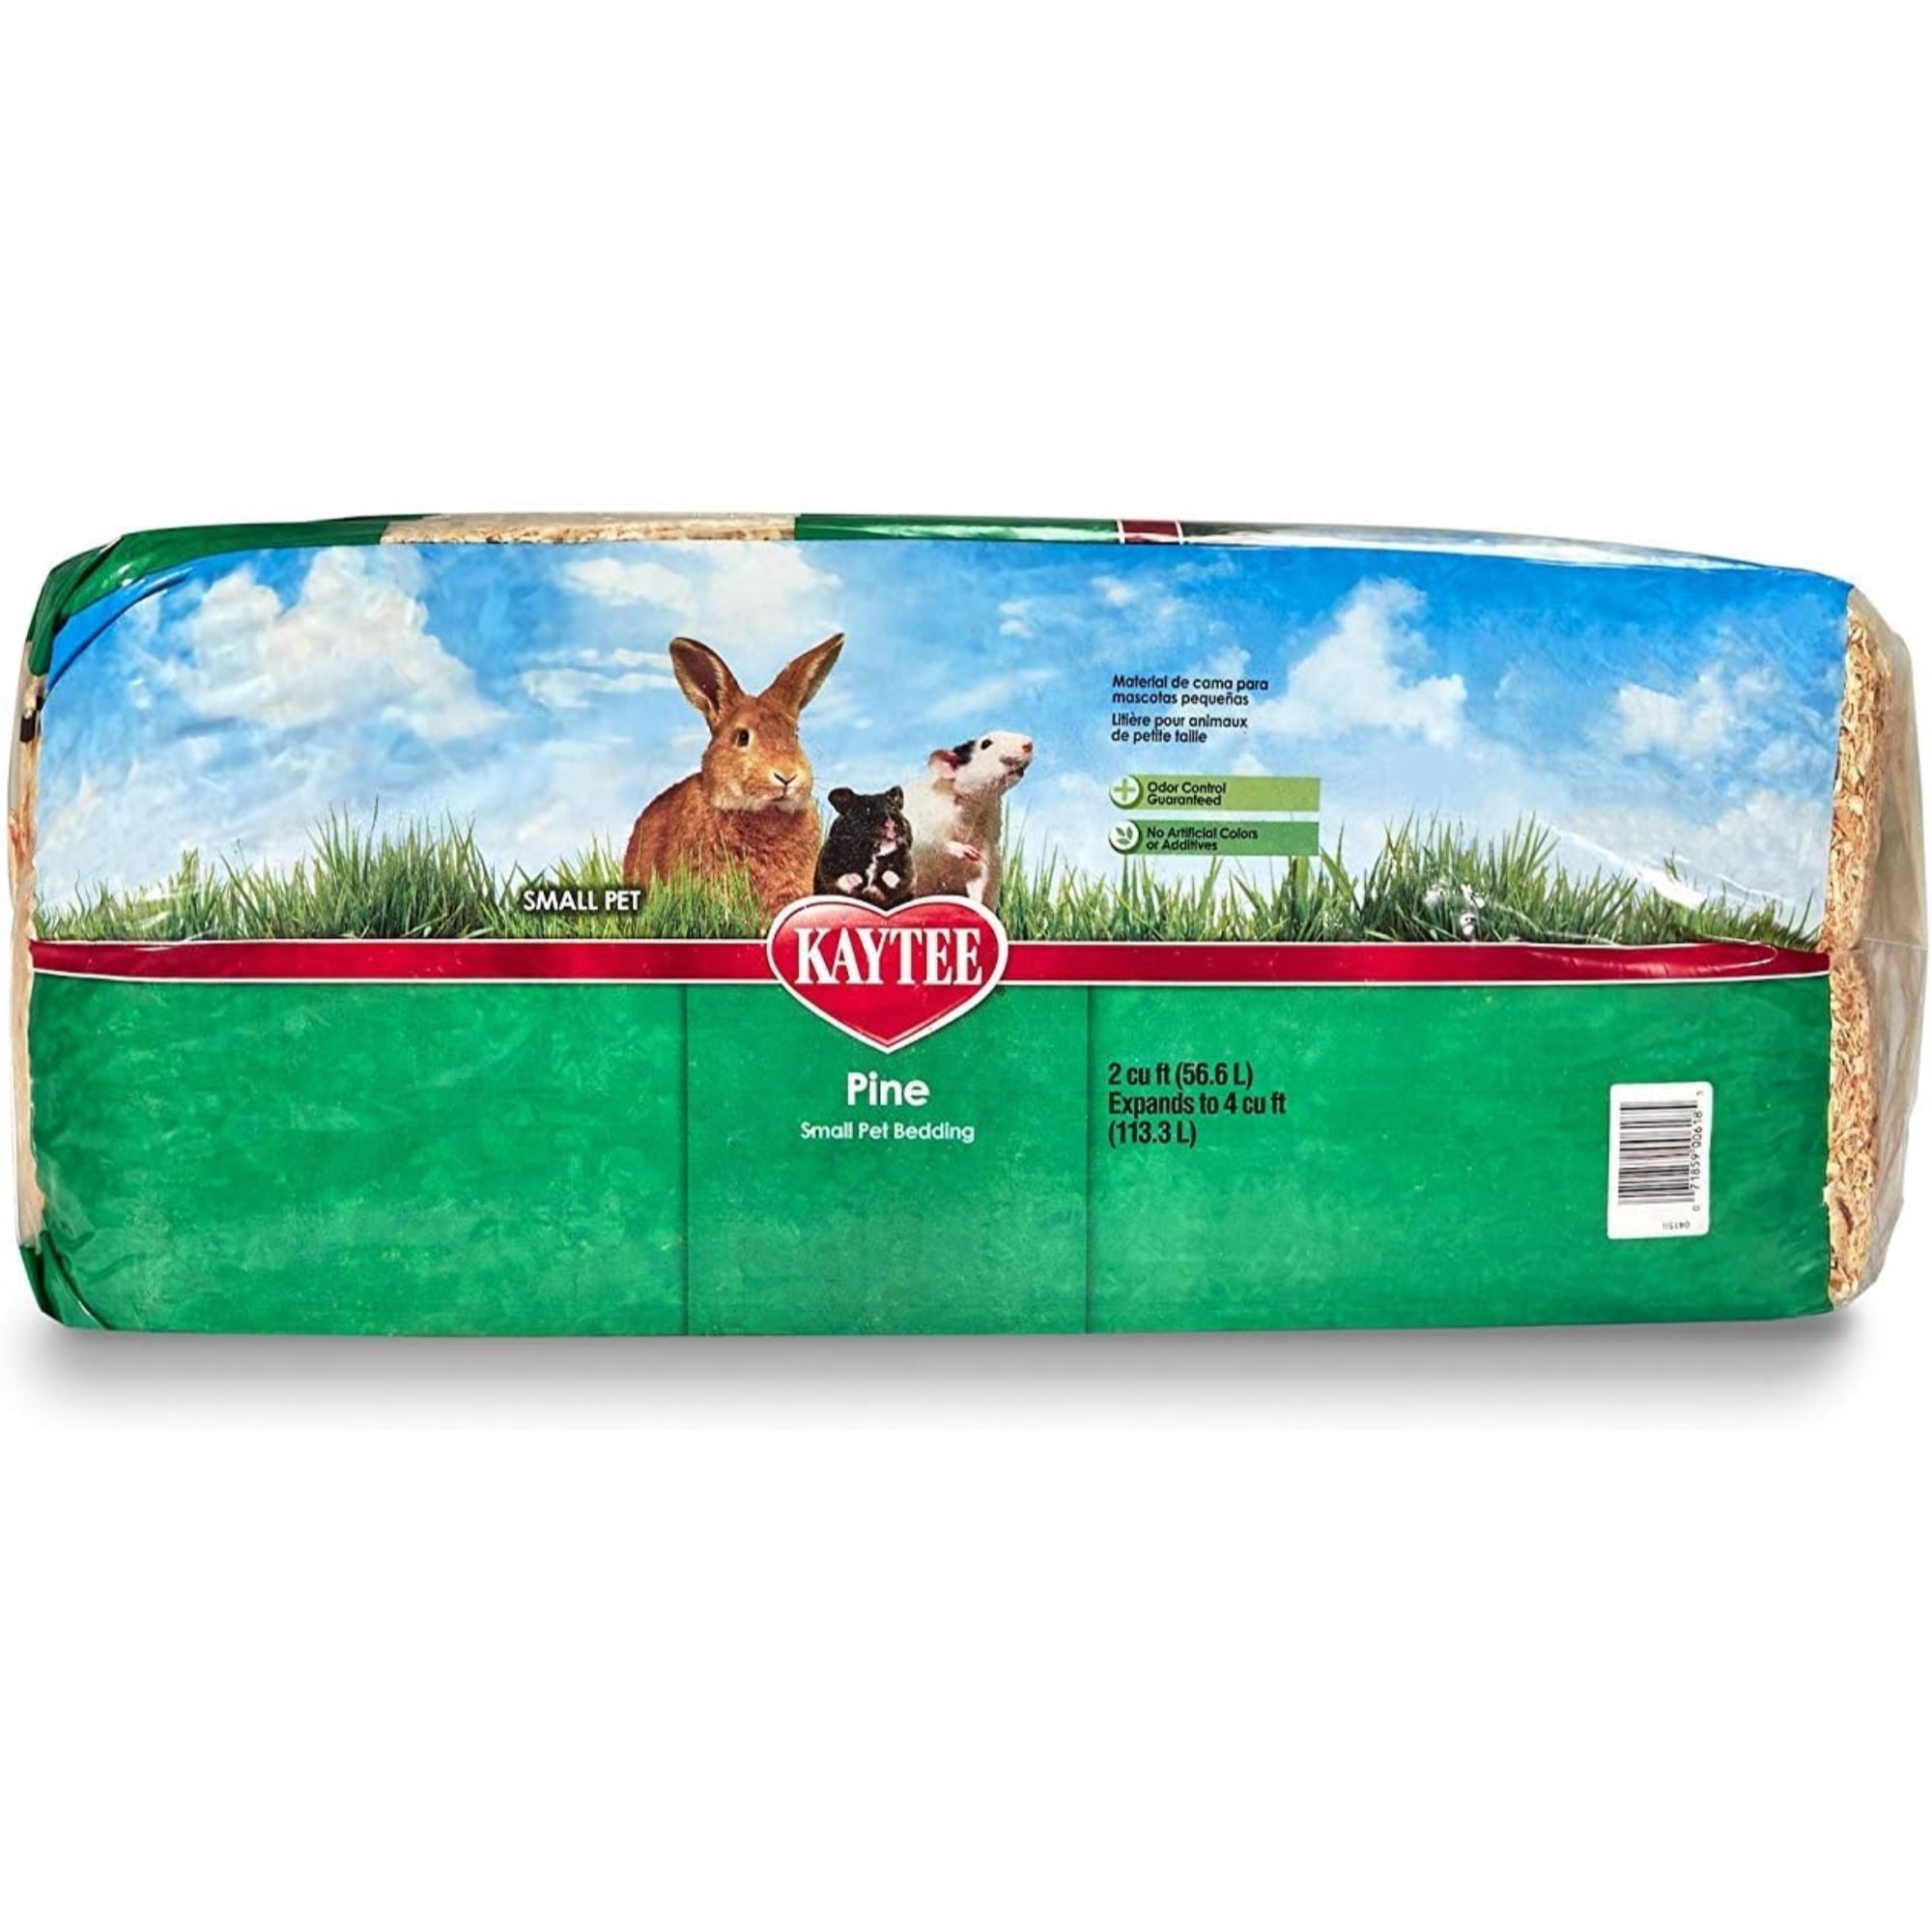 Kaytee Pine Bedding for Small Animals, 4 cu ft.